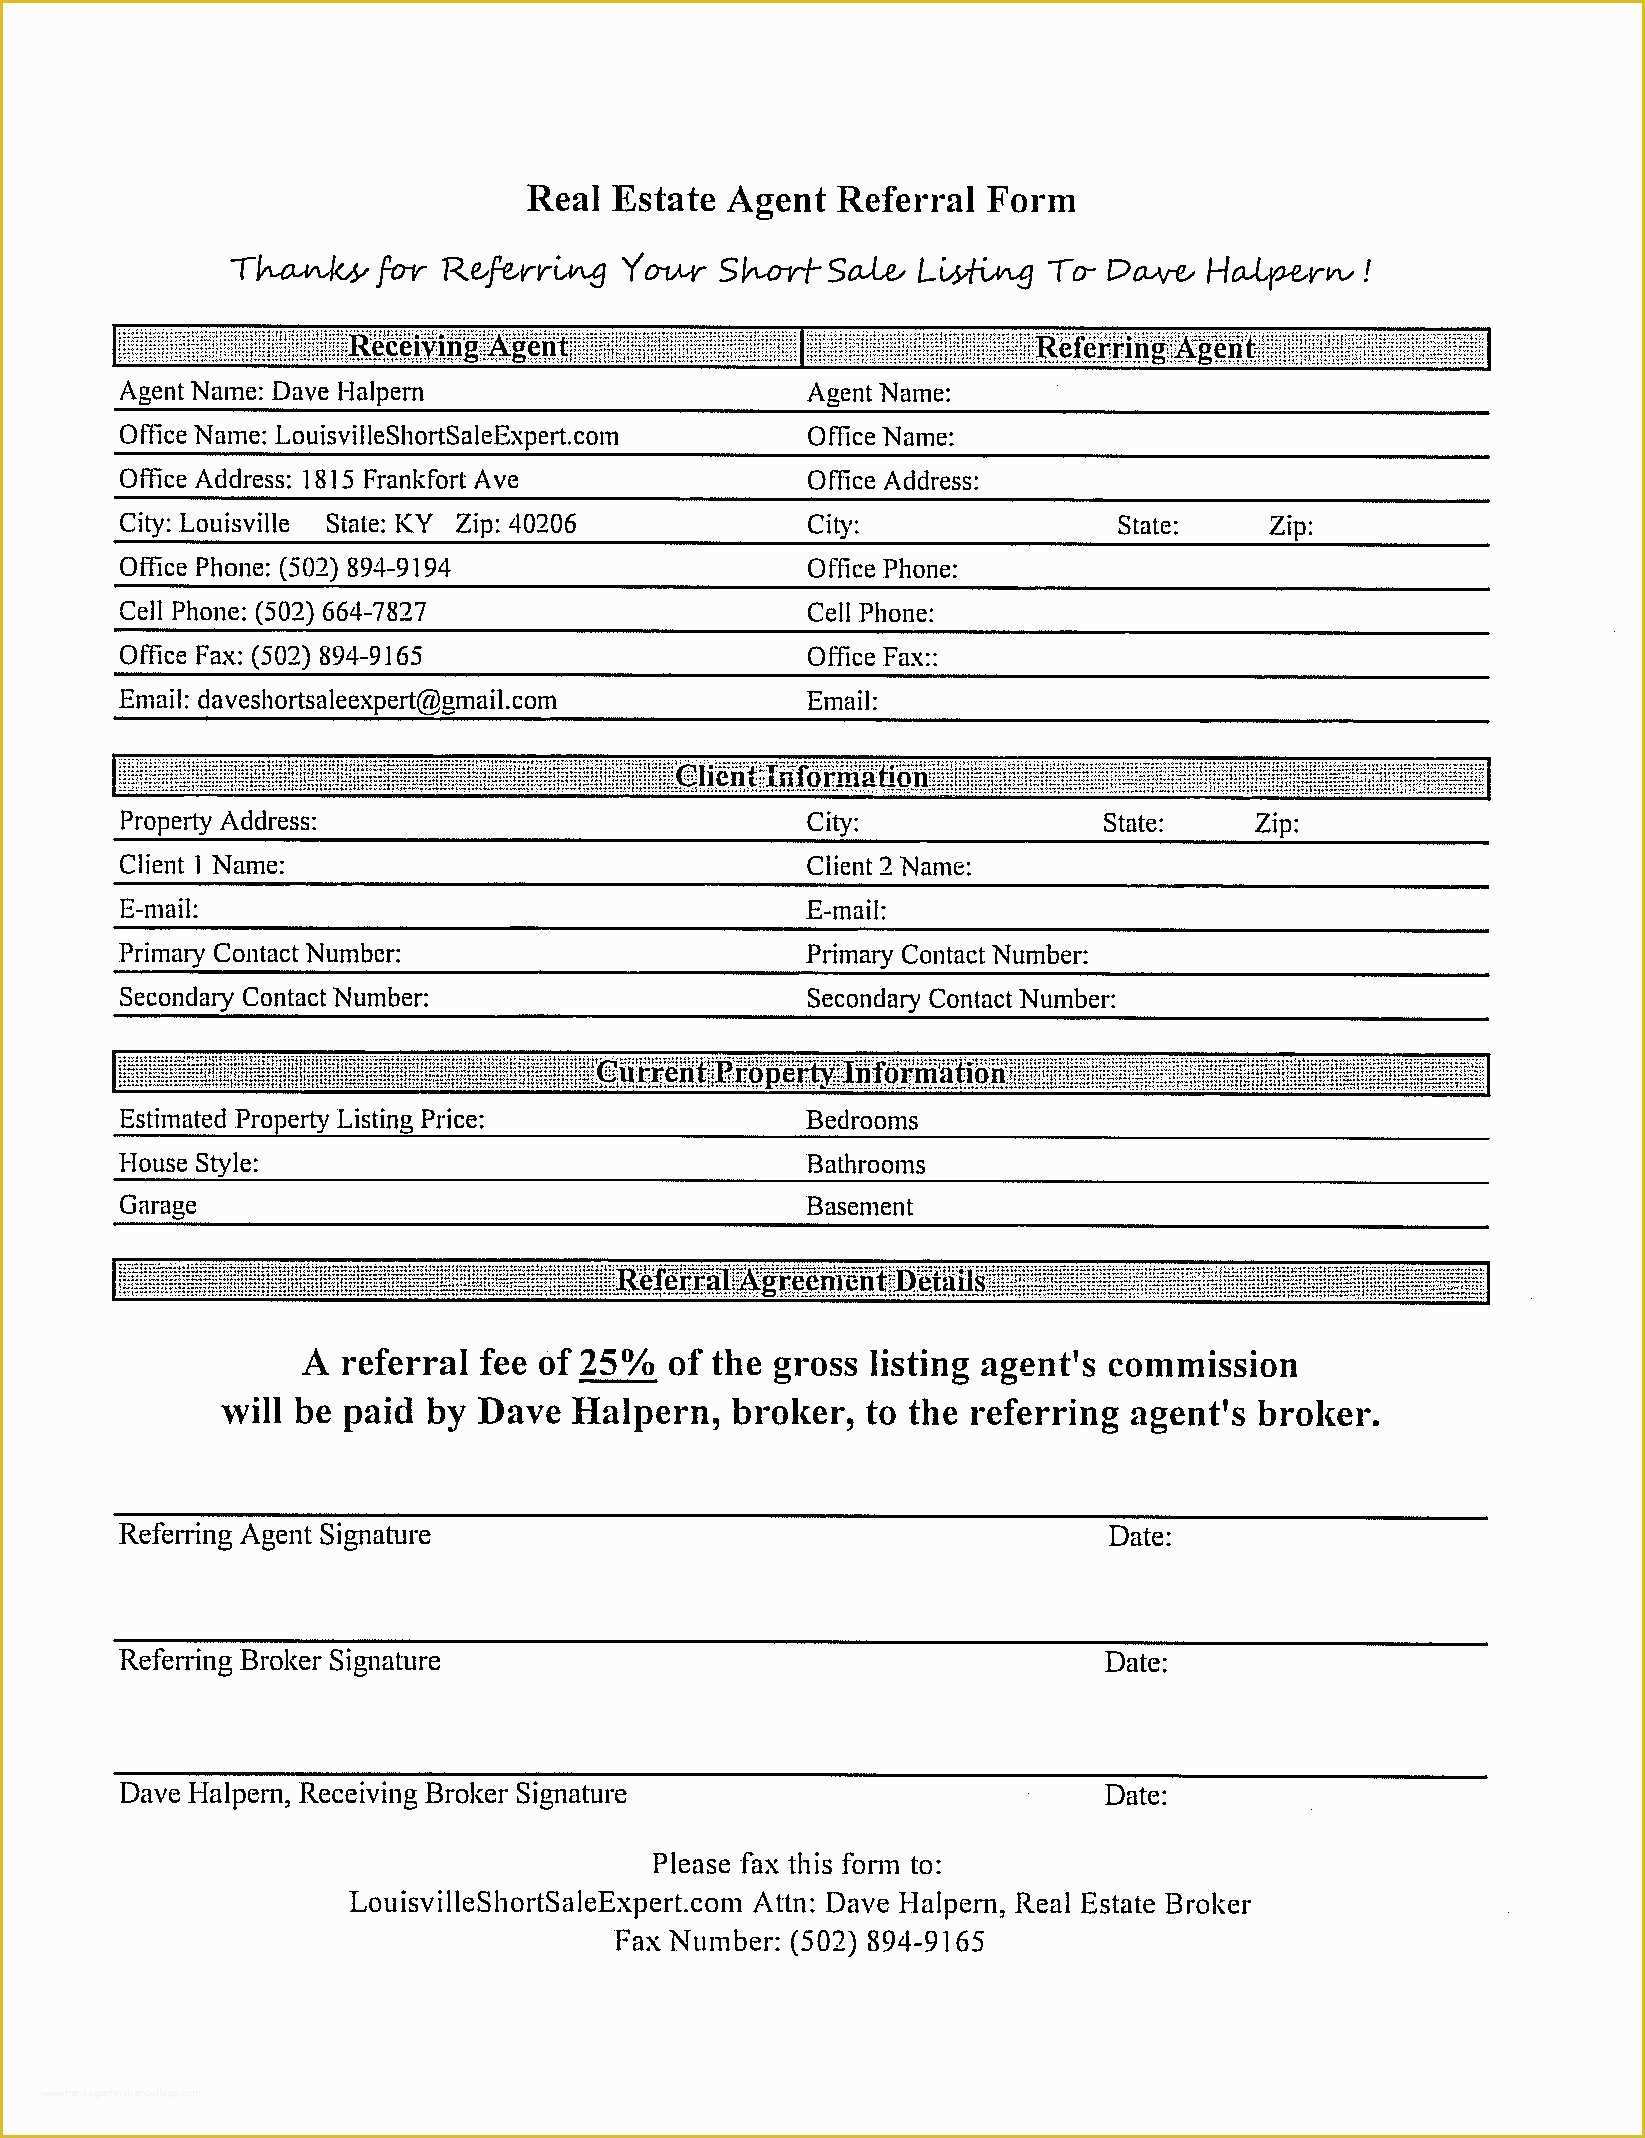 Free Real Estate Referral form Template Of 12 Best S Of Real Estate Agent Referral form Free